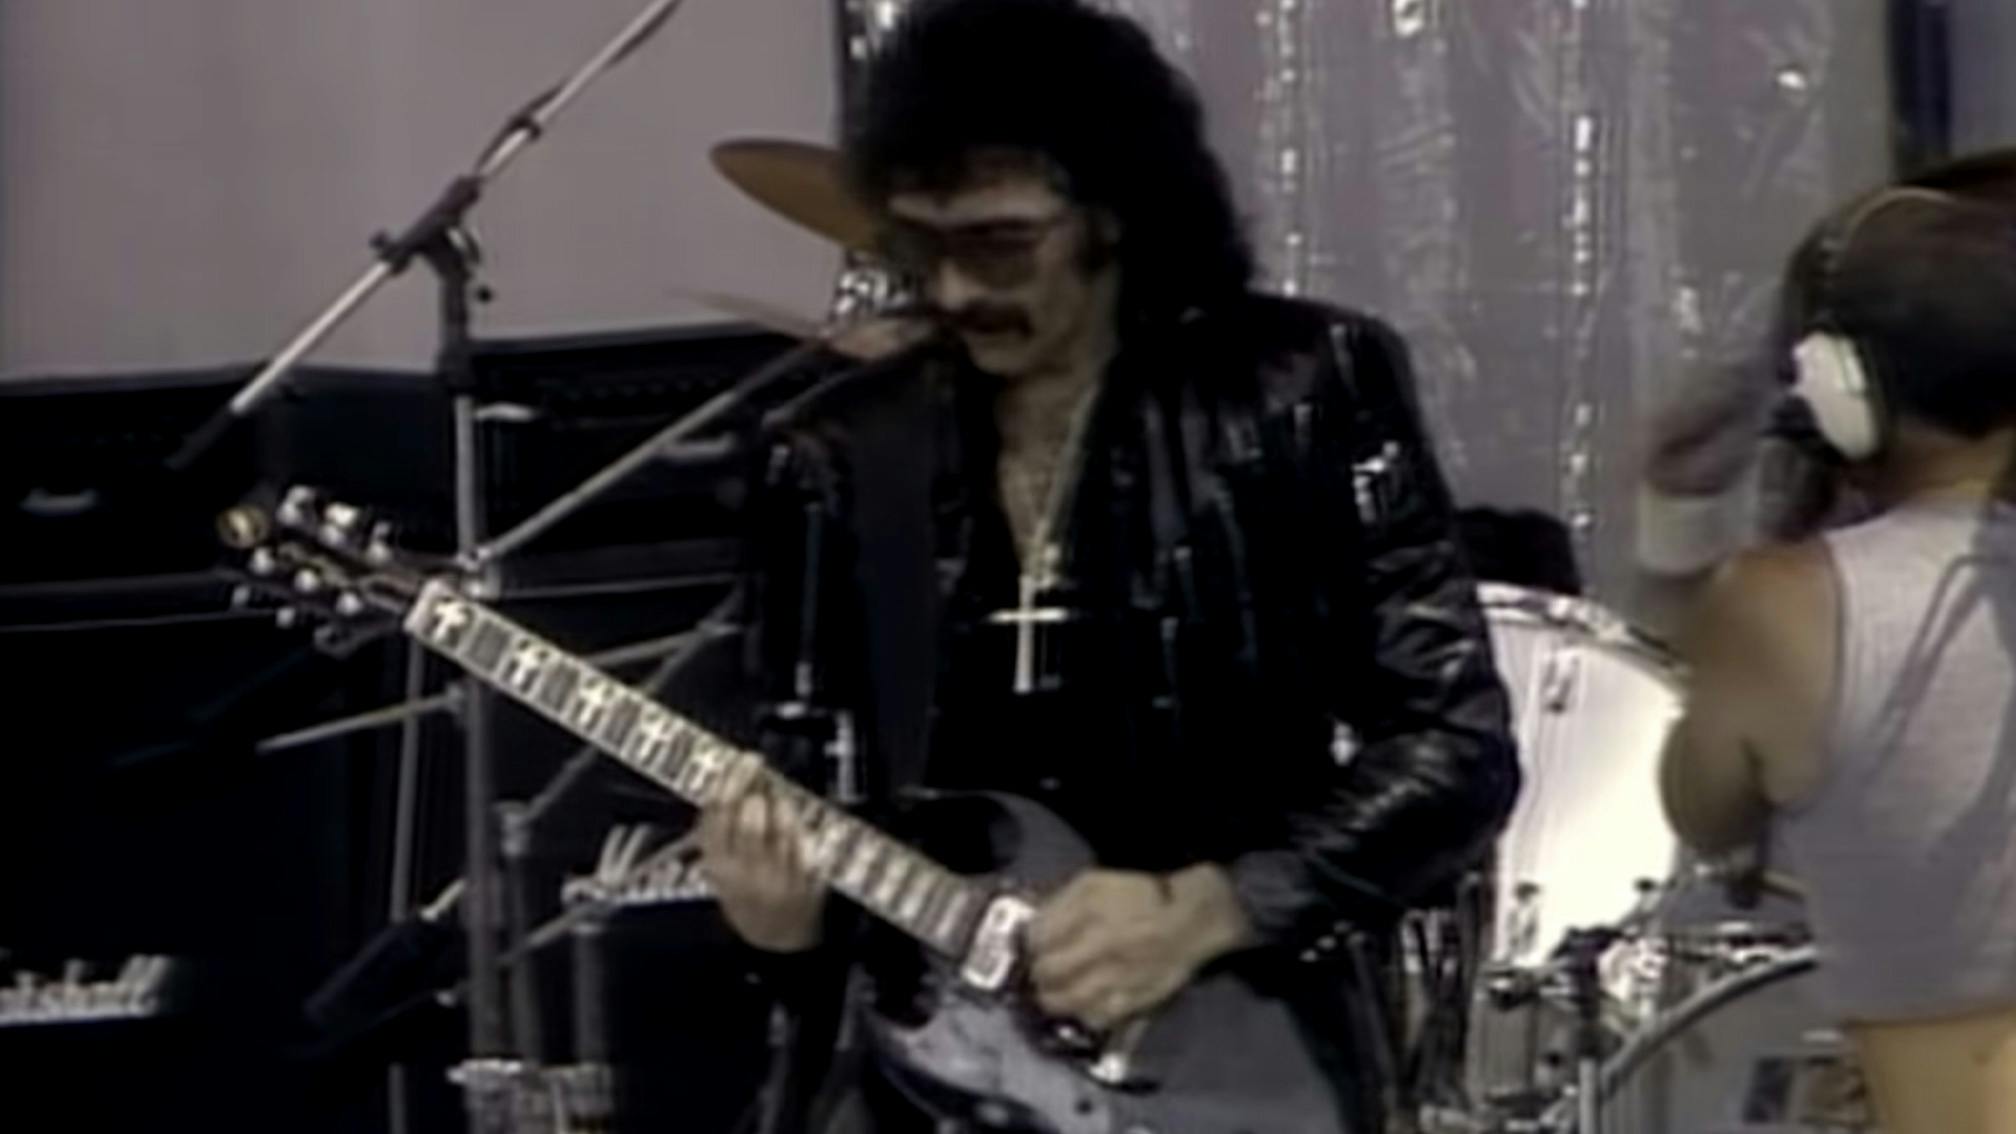 Tony Iommi On Sabbath's 1985 Live Aid Reunion: "It Was A Bit Surreal, To Be Honest…"